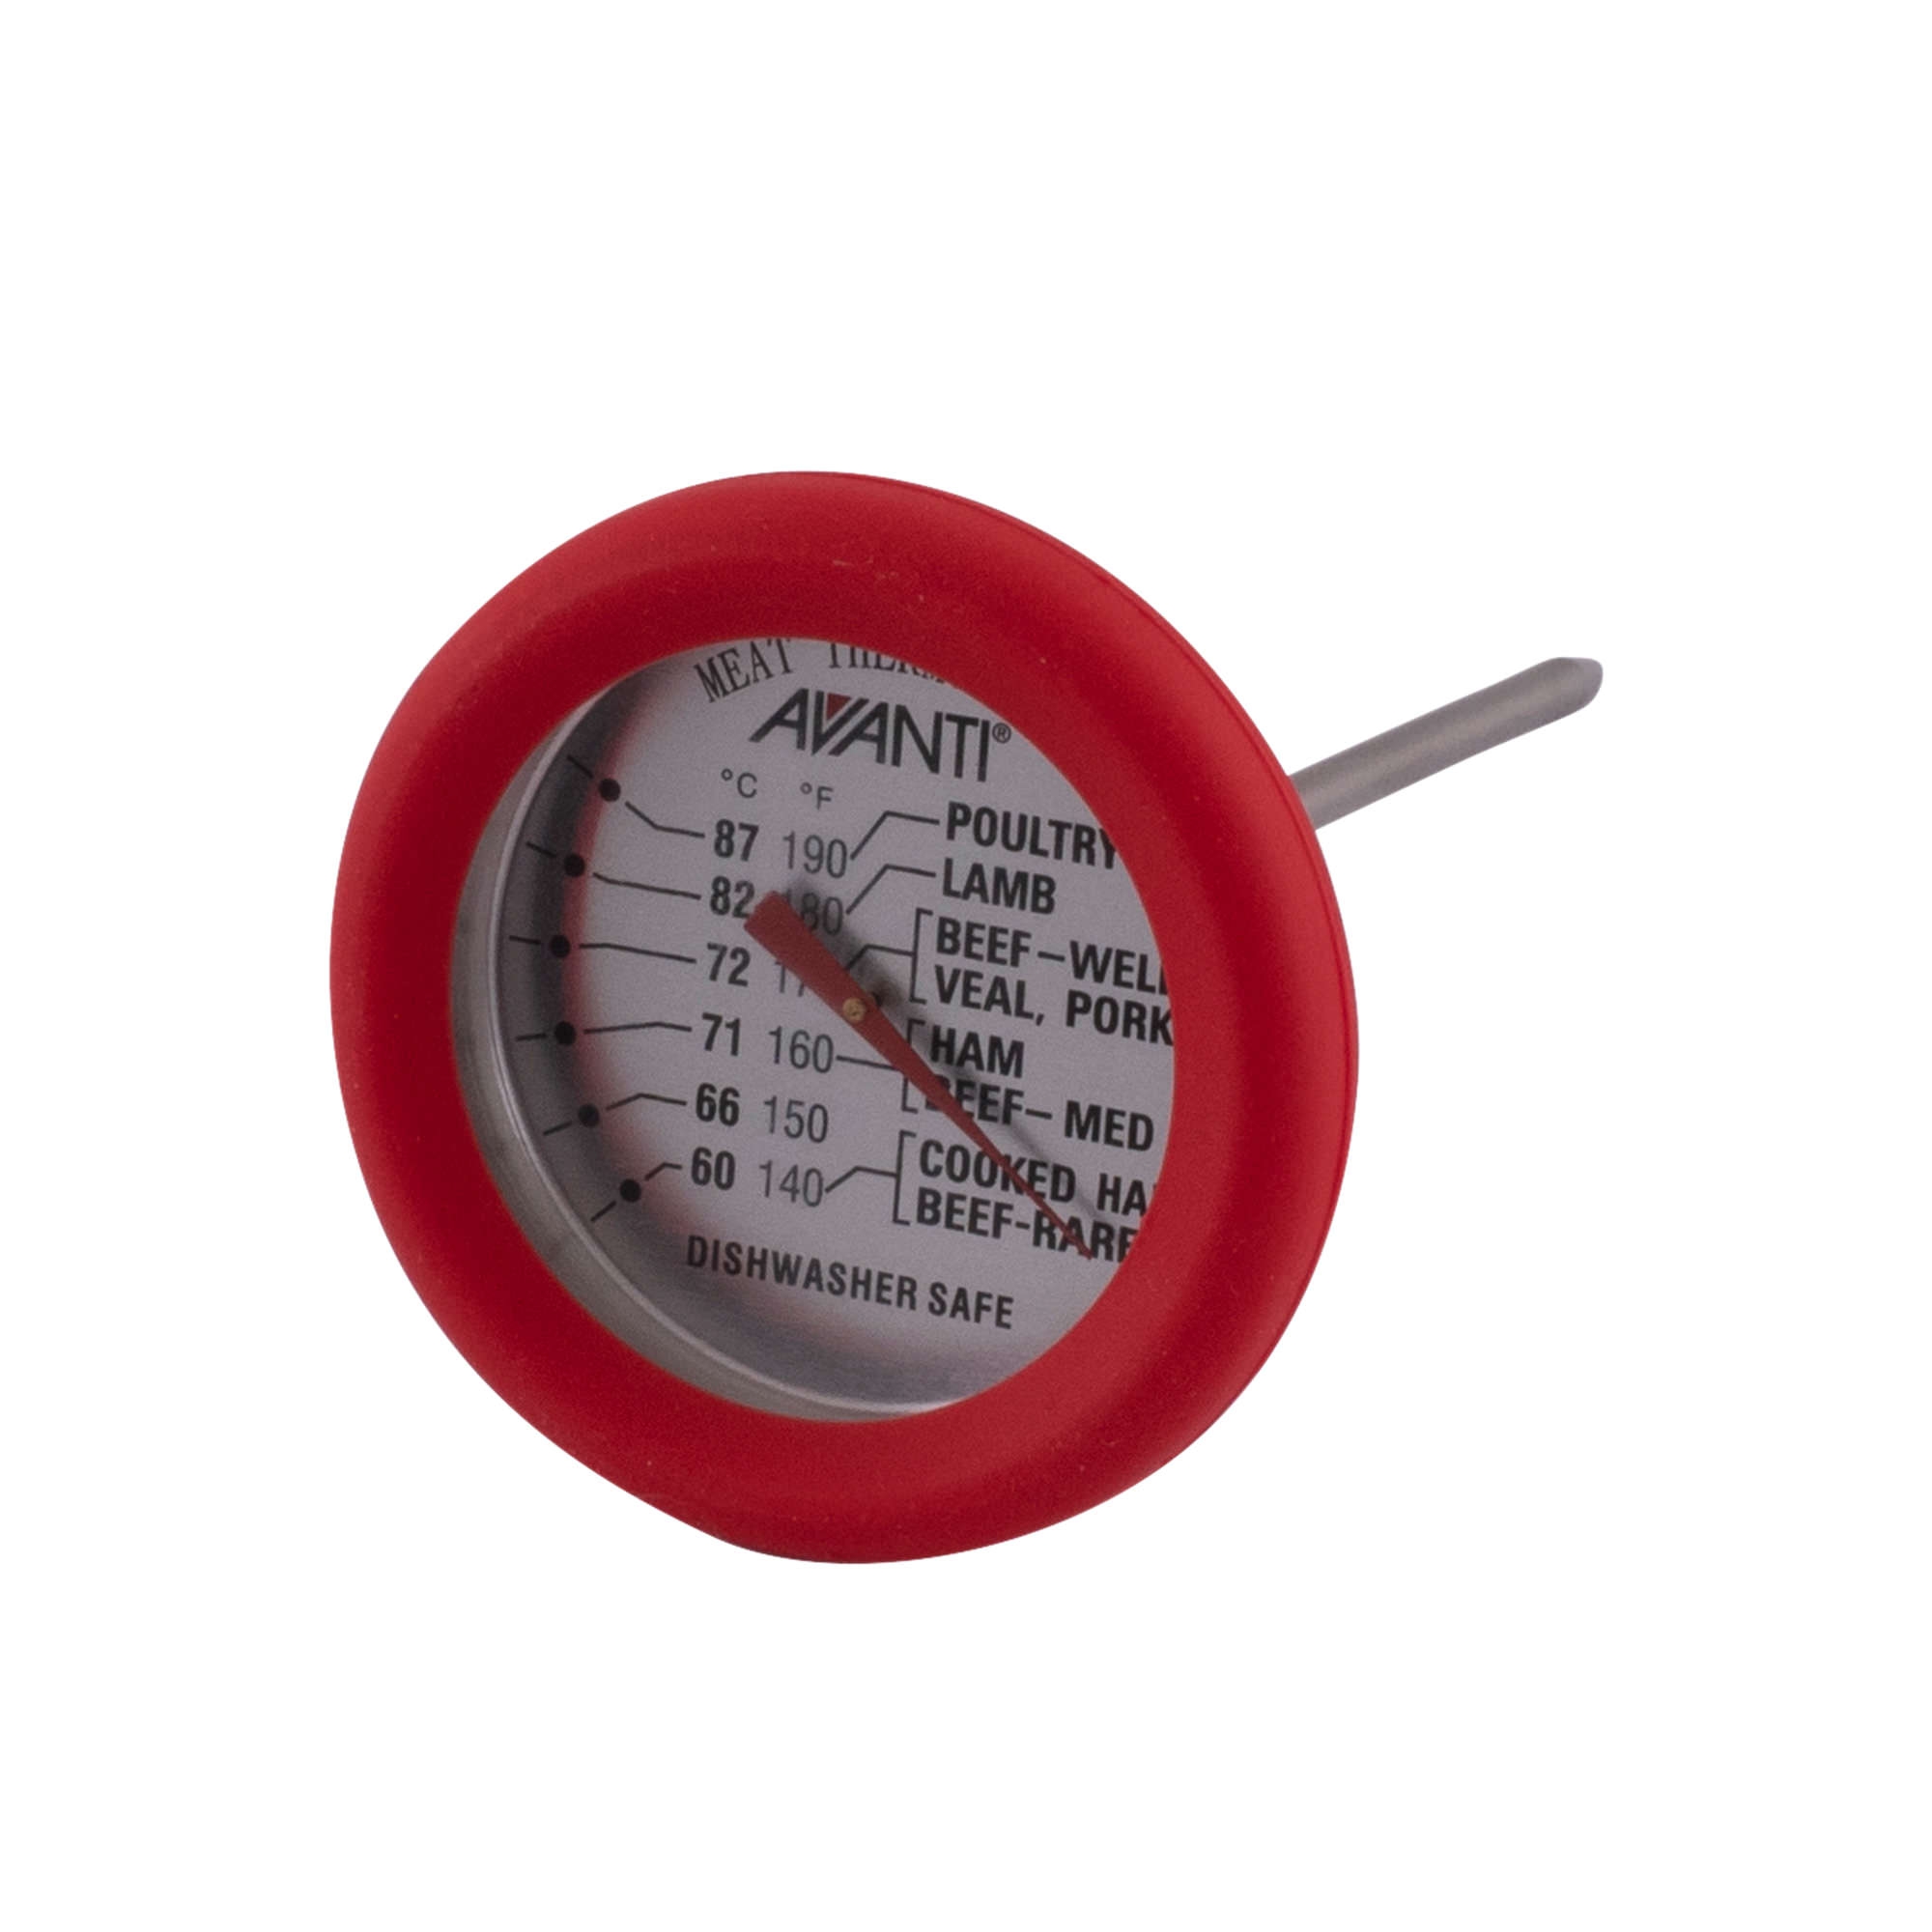 Avanti Meat Thermometer with Silicone Surround Image 1